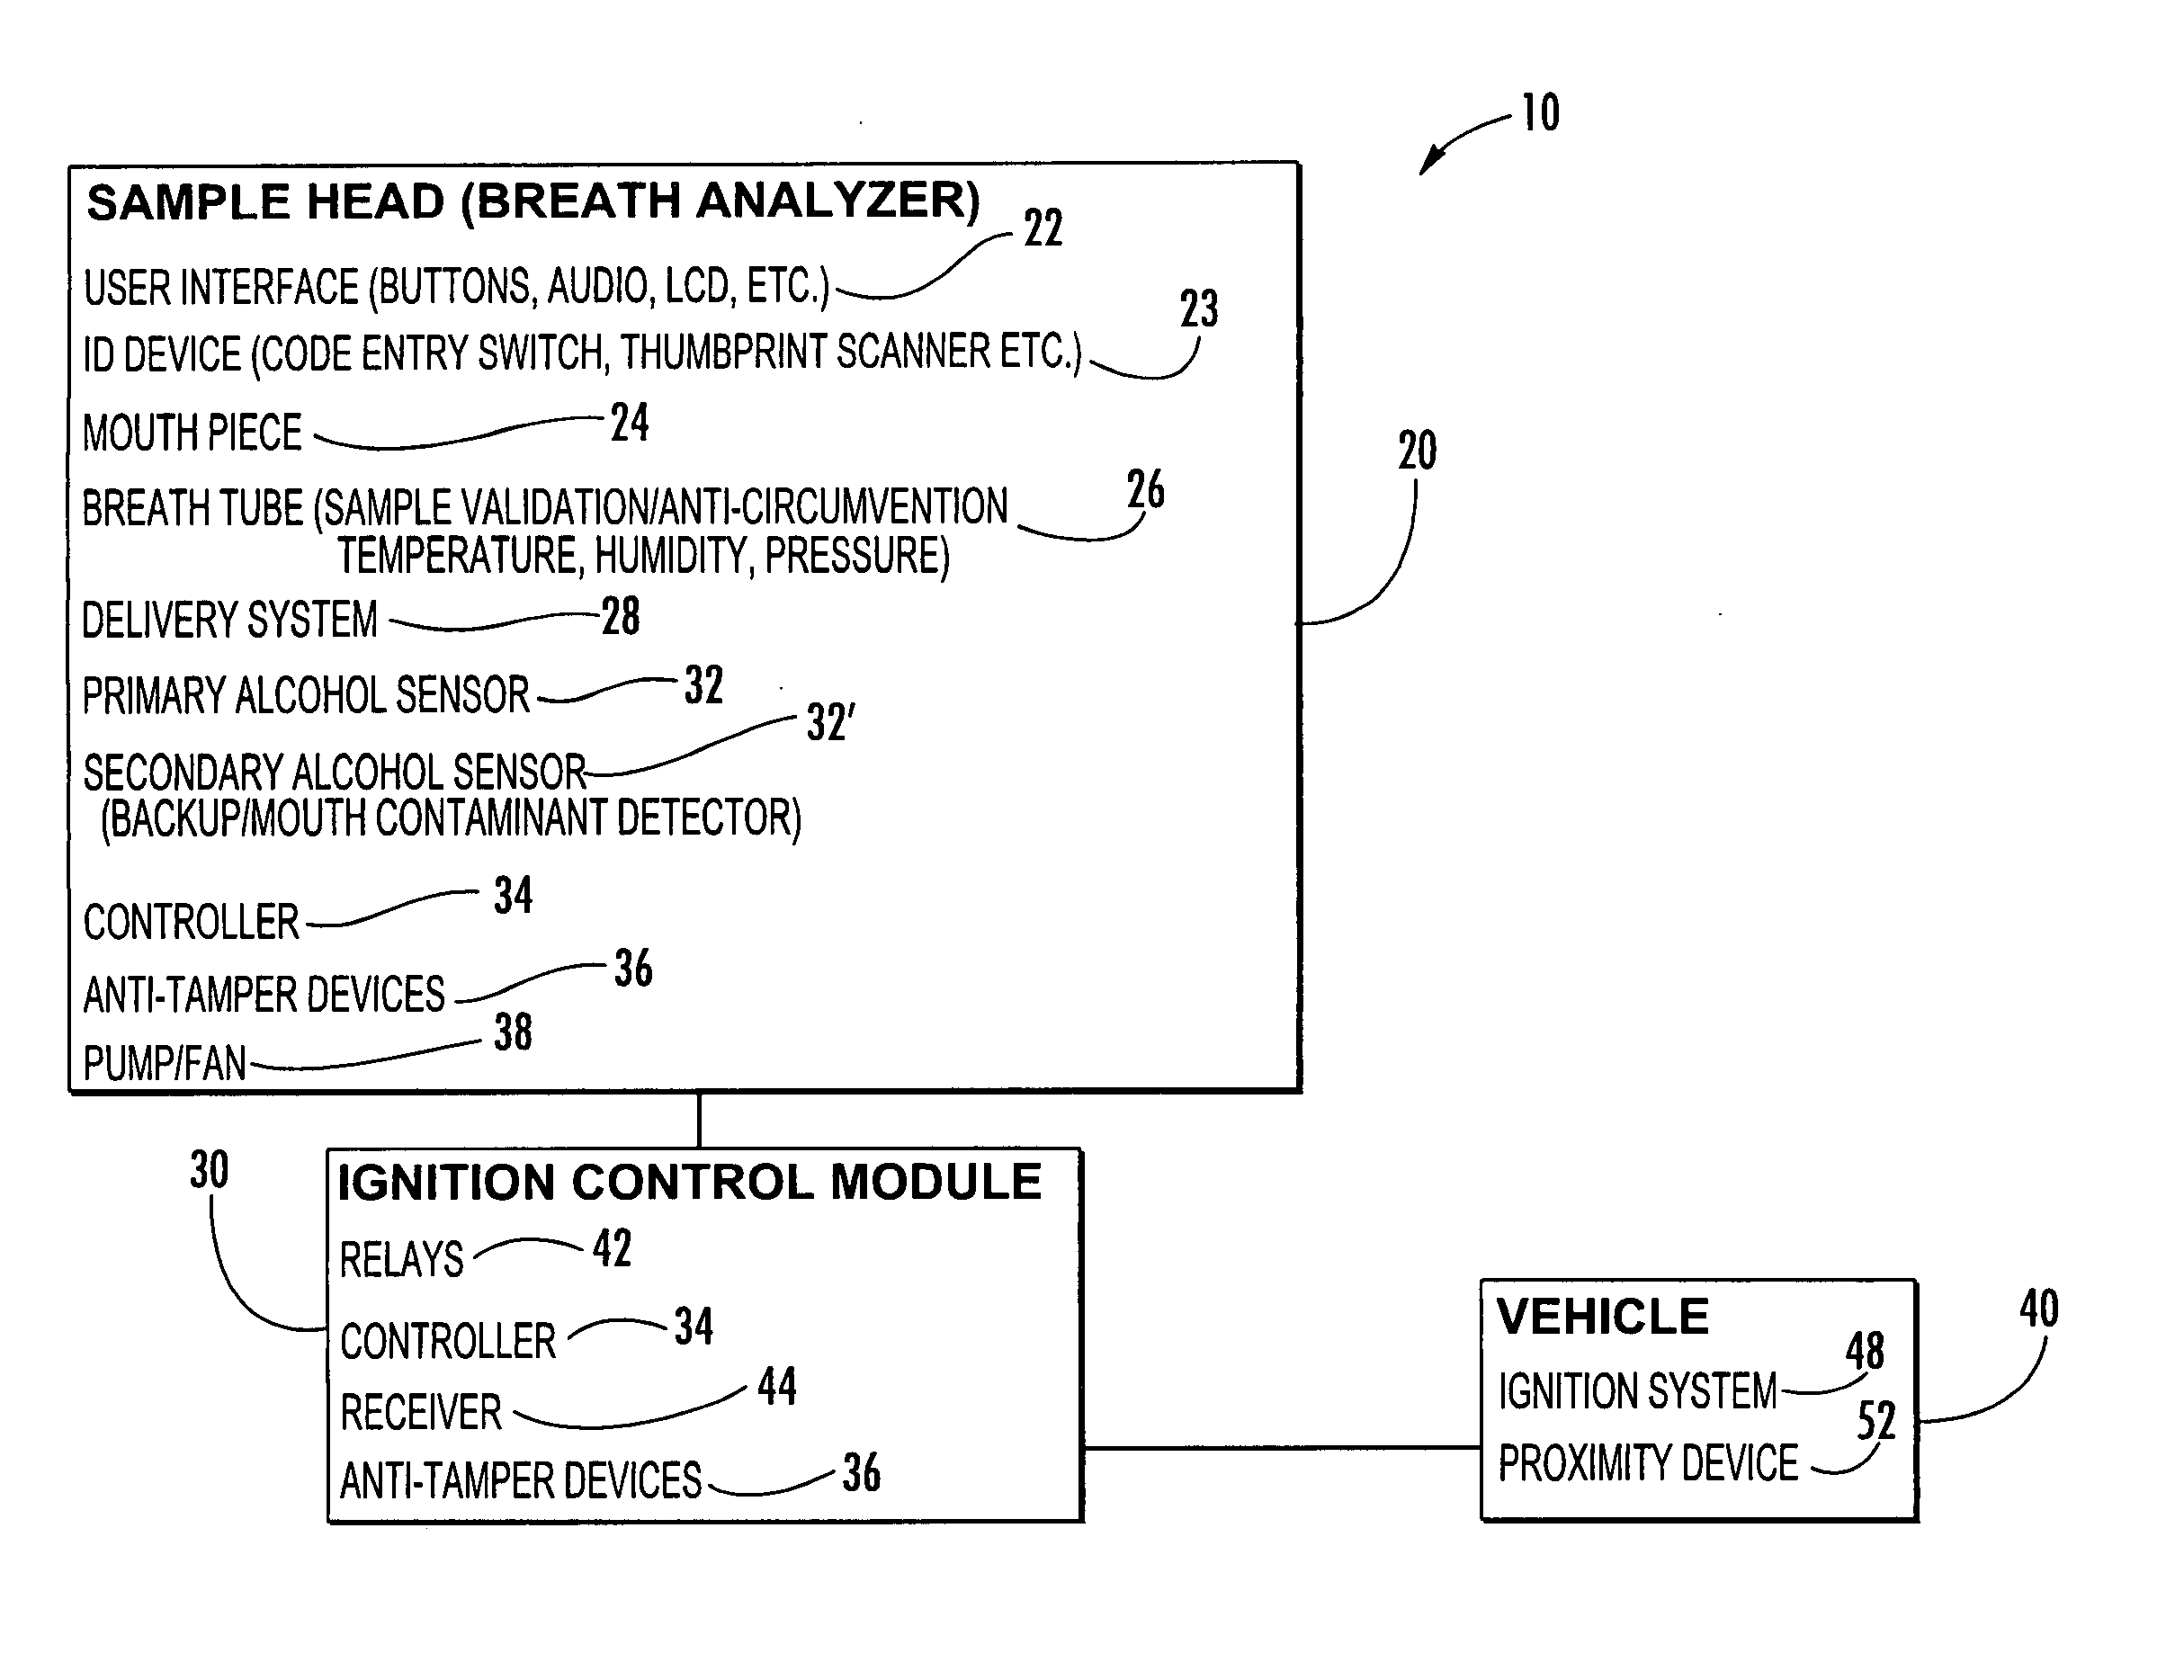 Vehicle ignition interlock systems with mouth alcohol contamination sensor